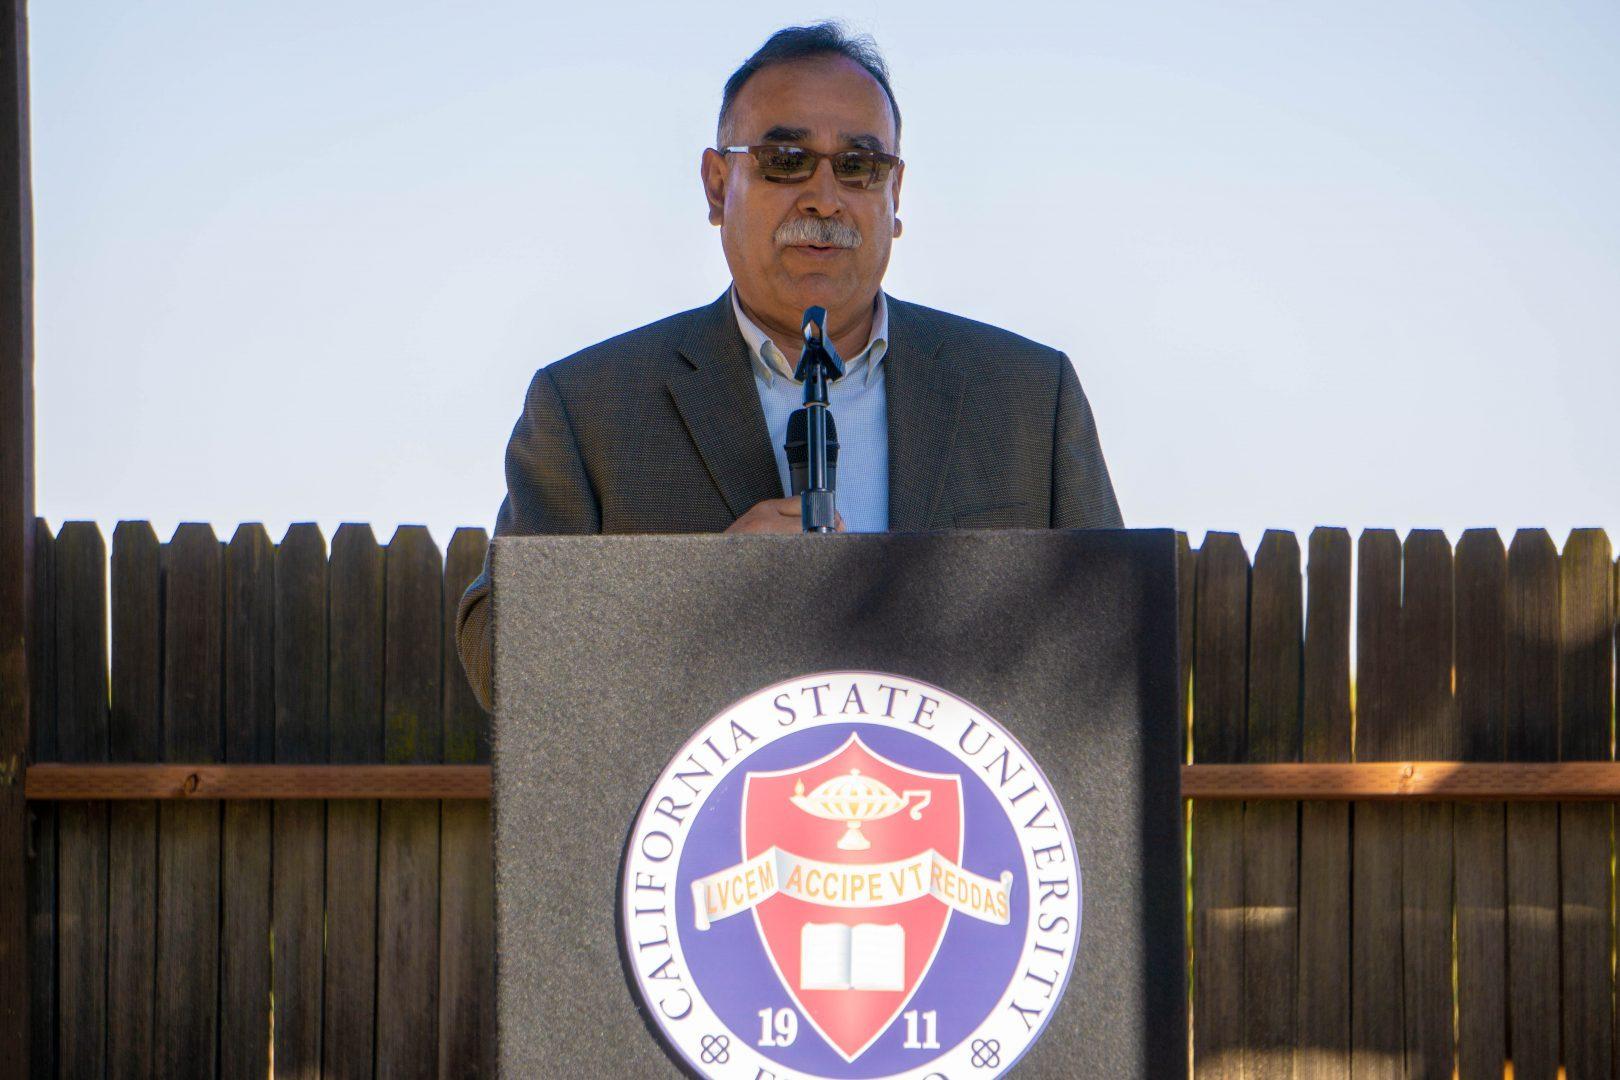 Garry Serrato, recipient of the 2018 Agriculturalist of the Year award speaks at a presentation ceremony at Fresno State on Oct. 9.